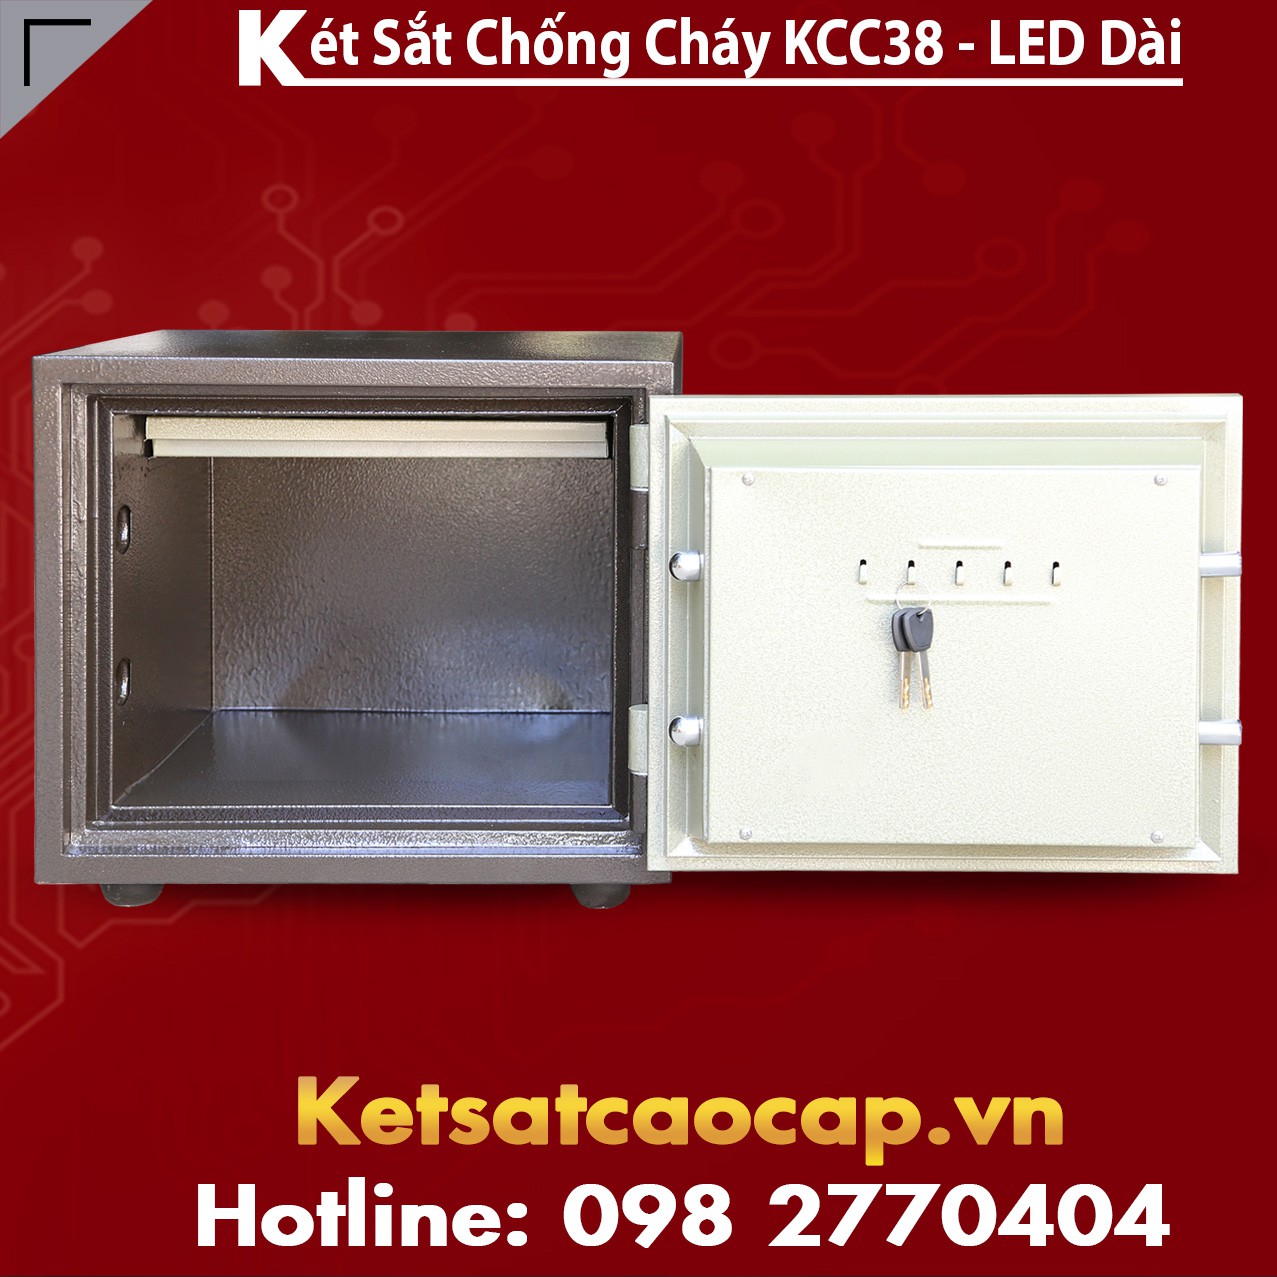 Hotel Safe Manufacturers & Suppliers Noi Cung Cap Ket Sat Mini Chong Chay Chinh Hang